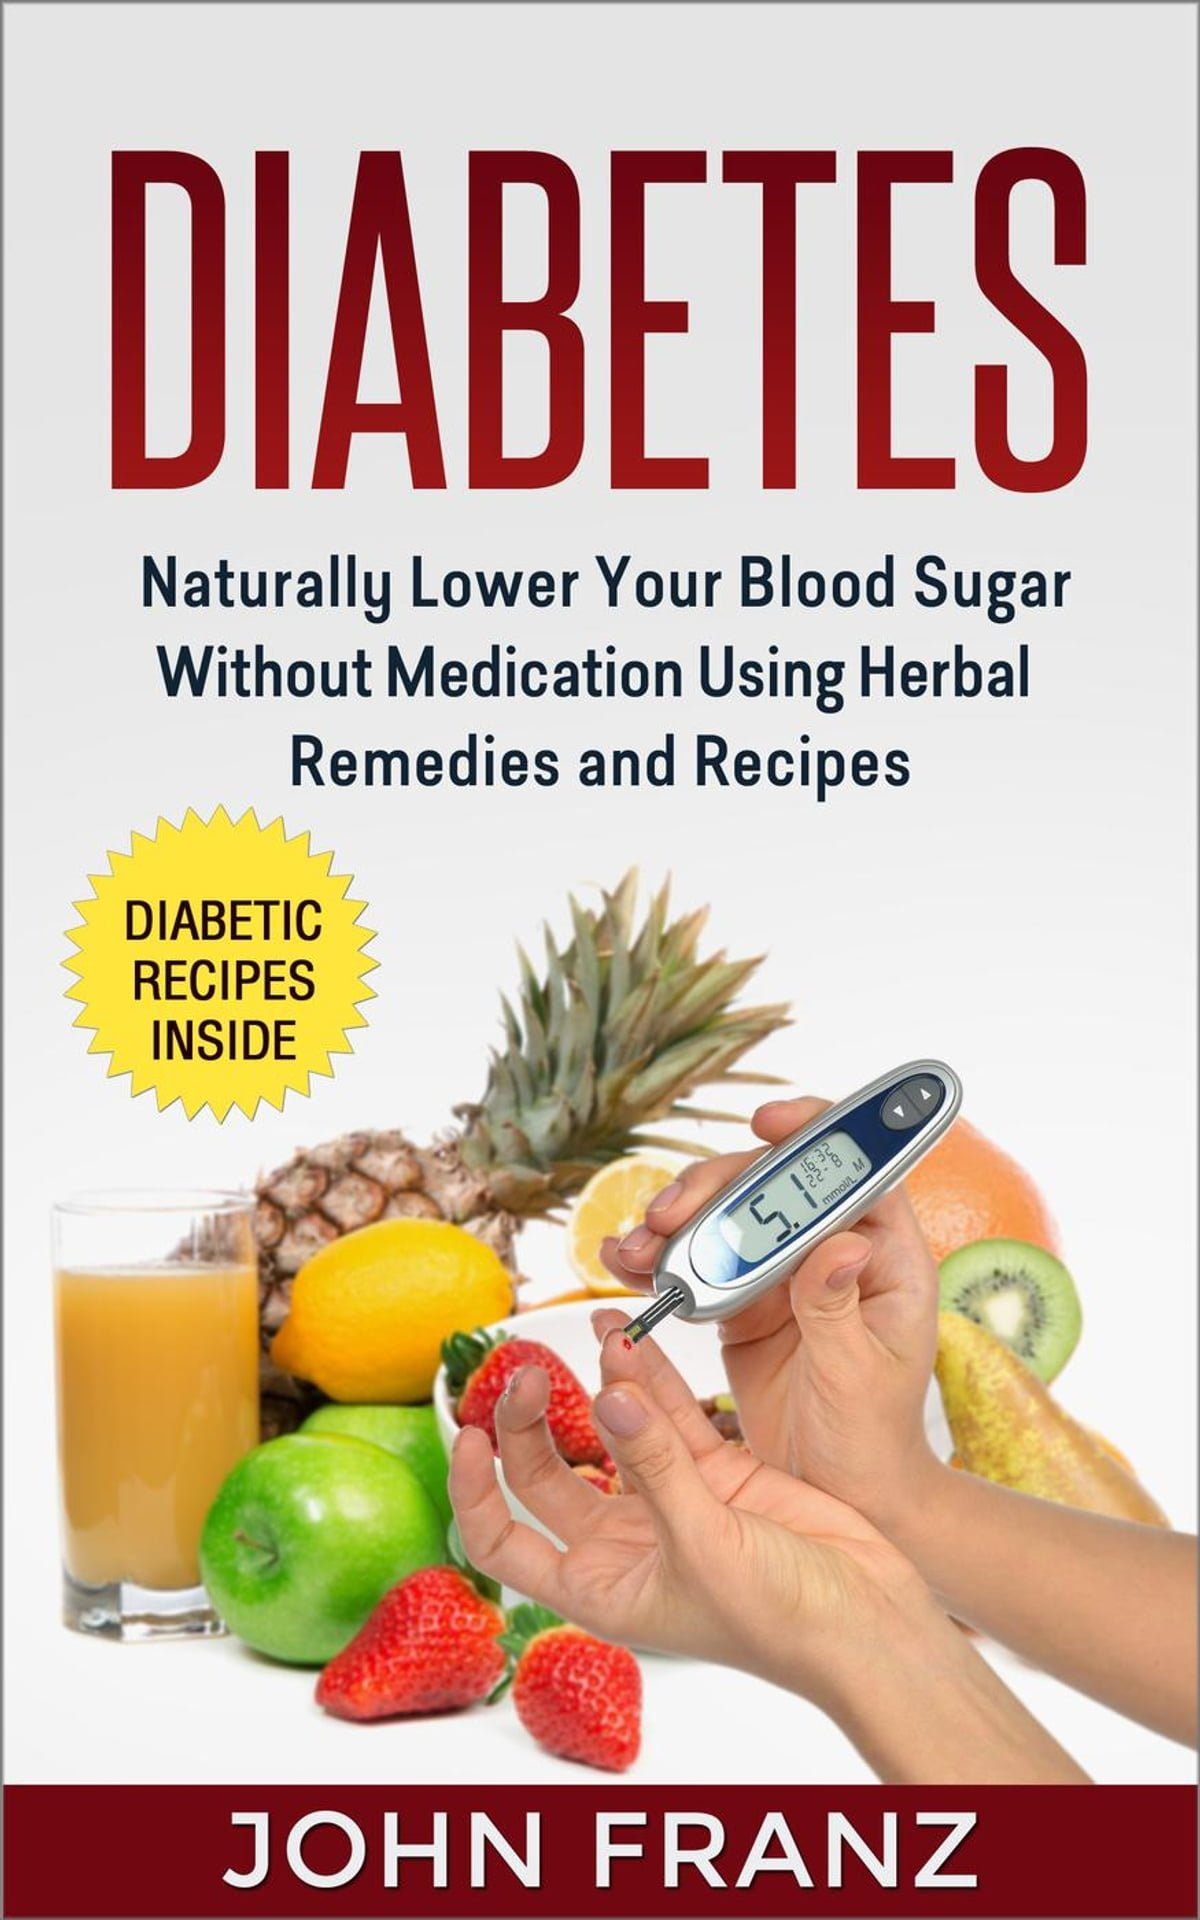 Lowering Blood Sugar: how to lower blood sugar naturally without medication